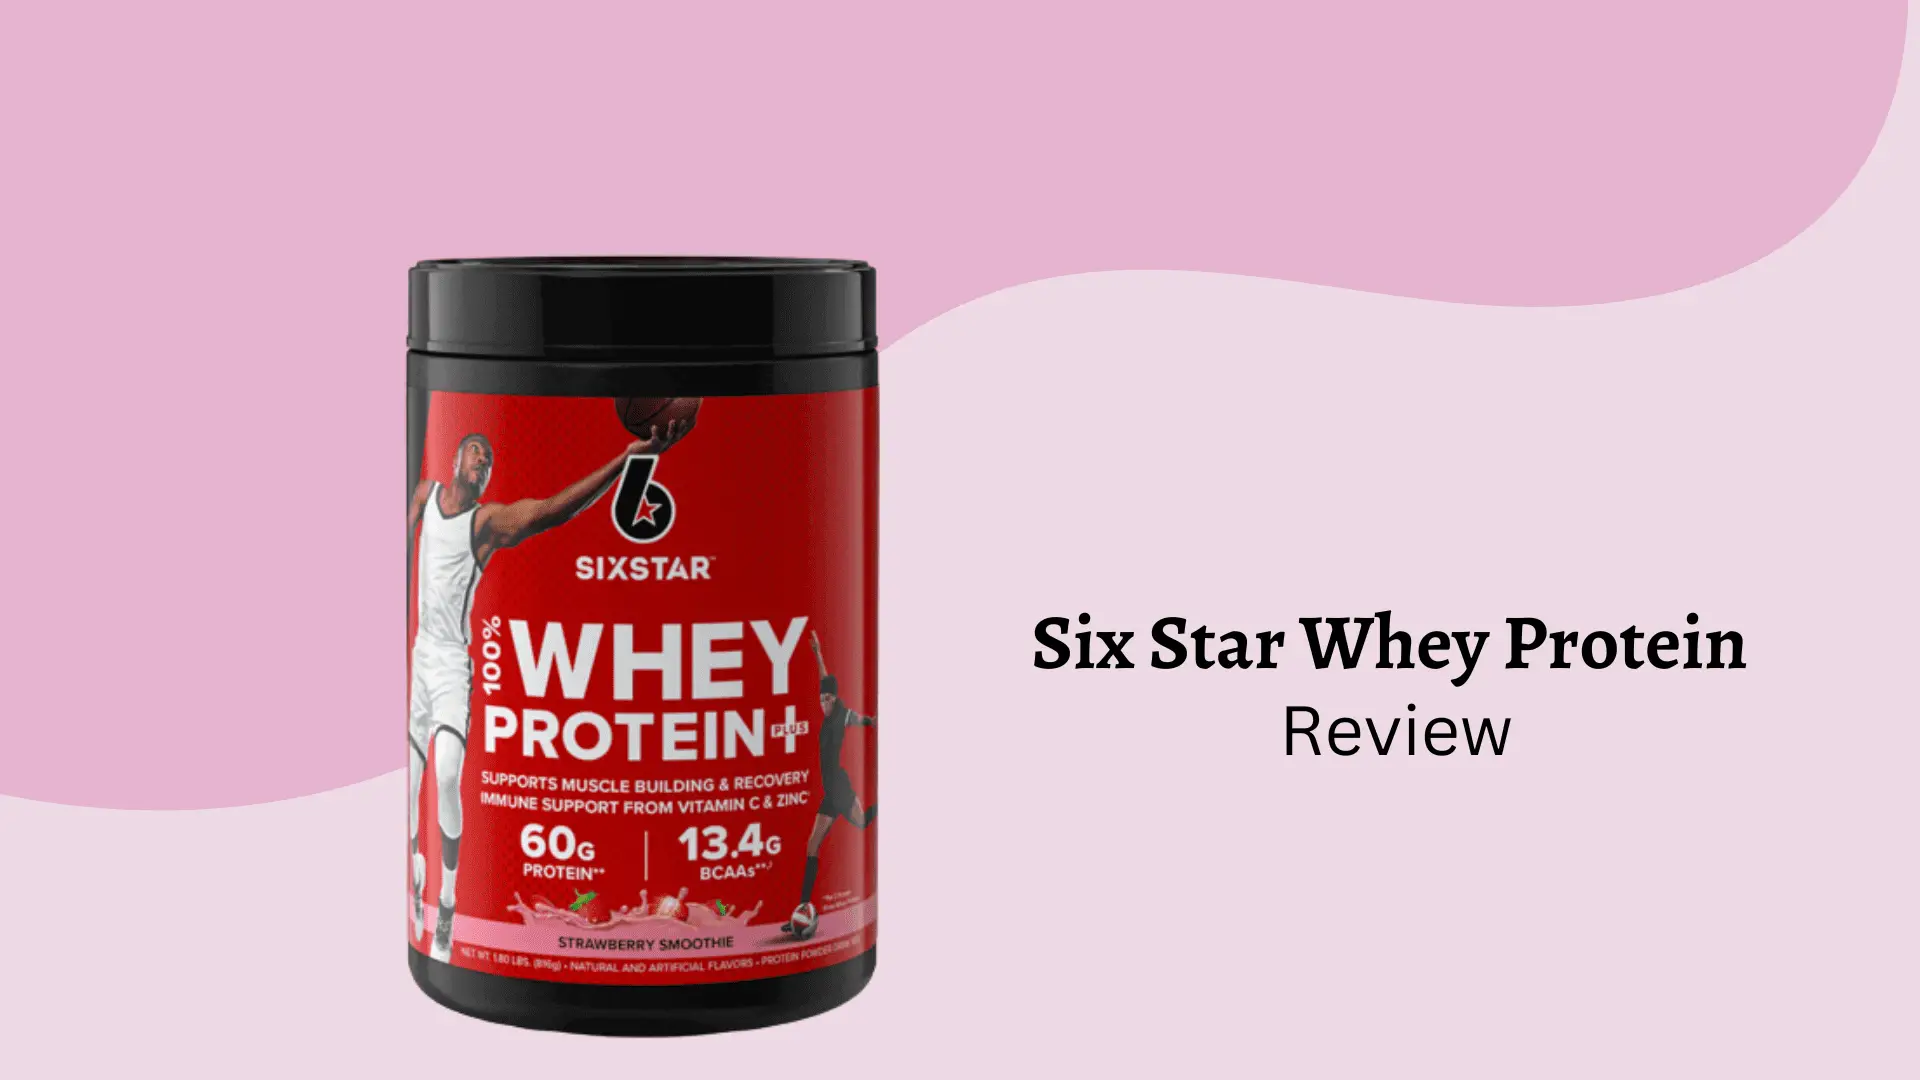 Six Star Whey Protein Supplement in Left